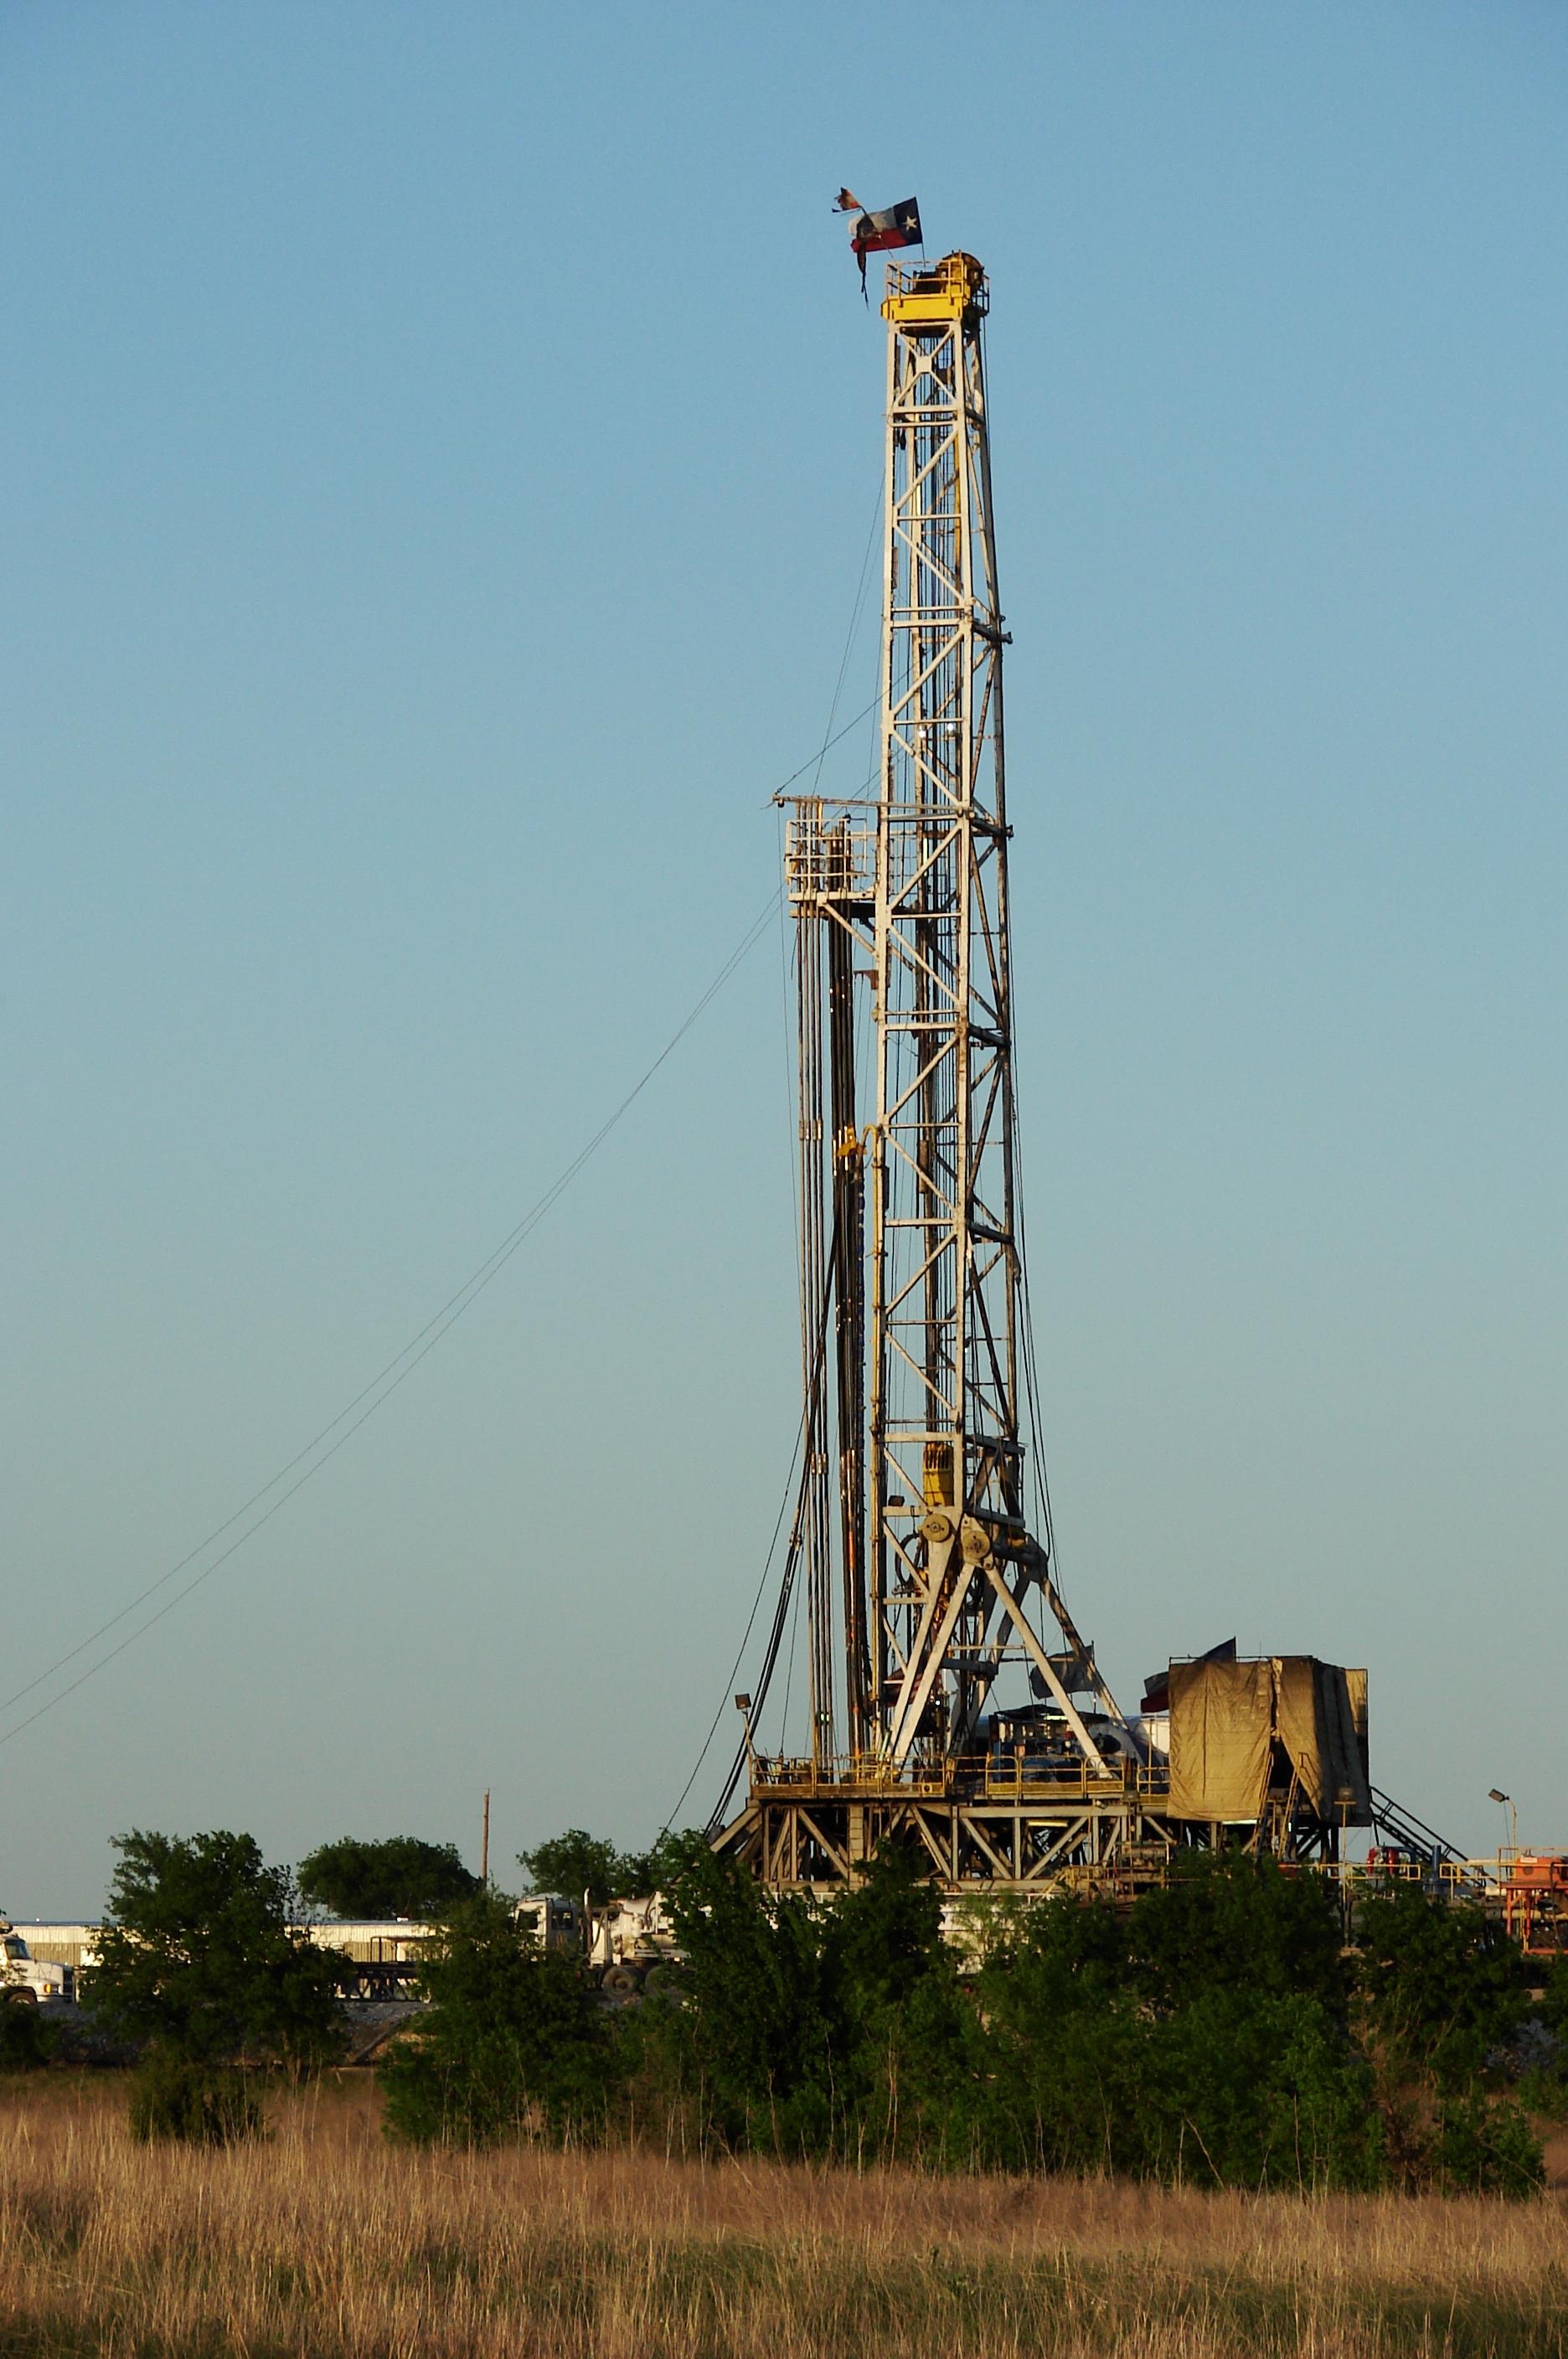 The Argument Against Hydraulic Fracturing